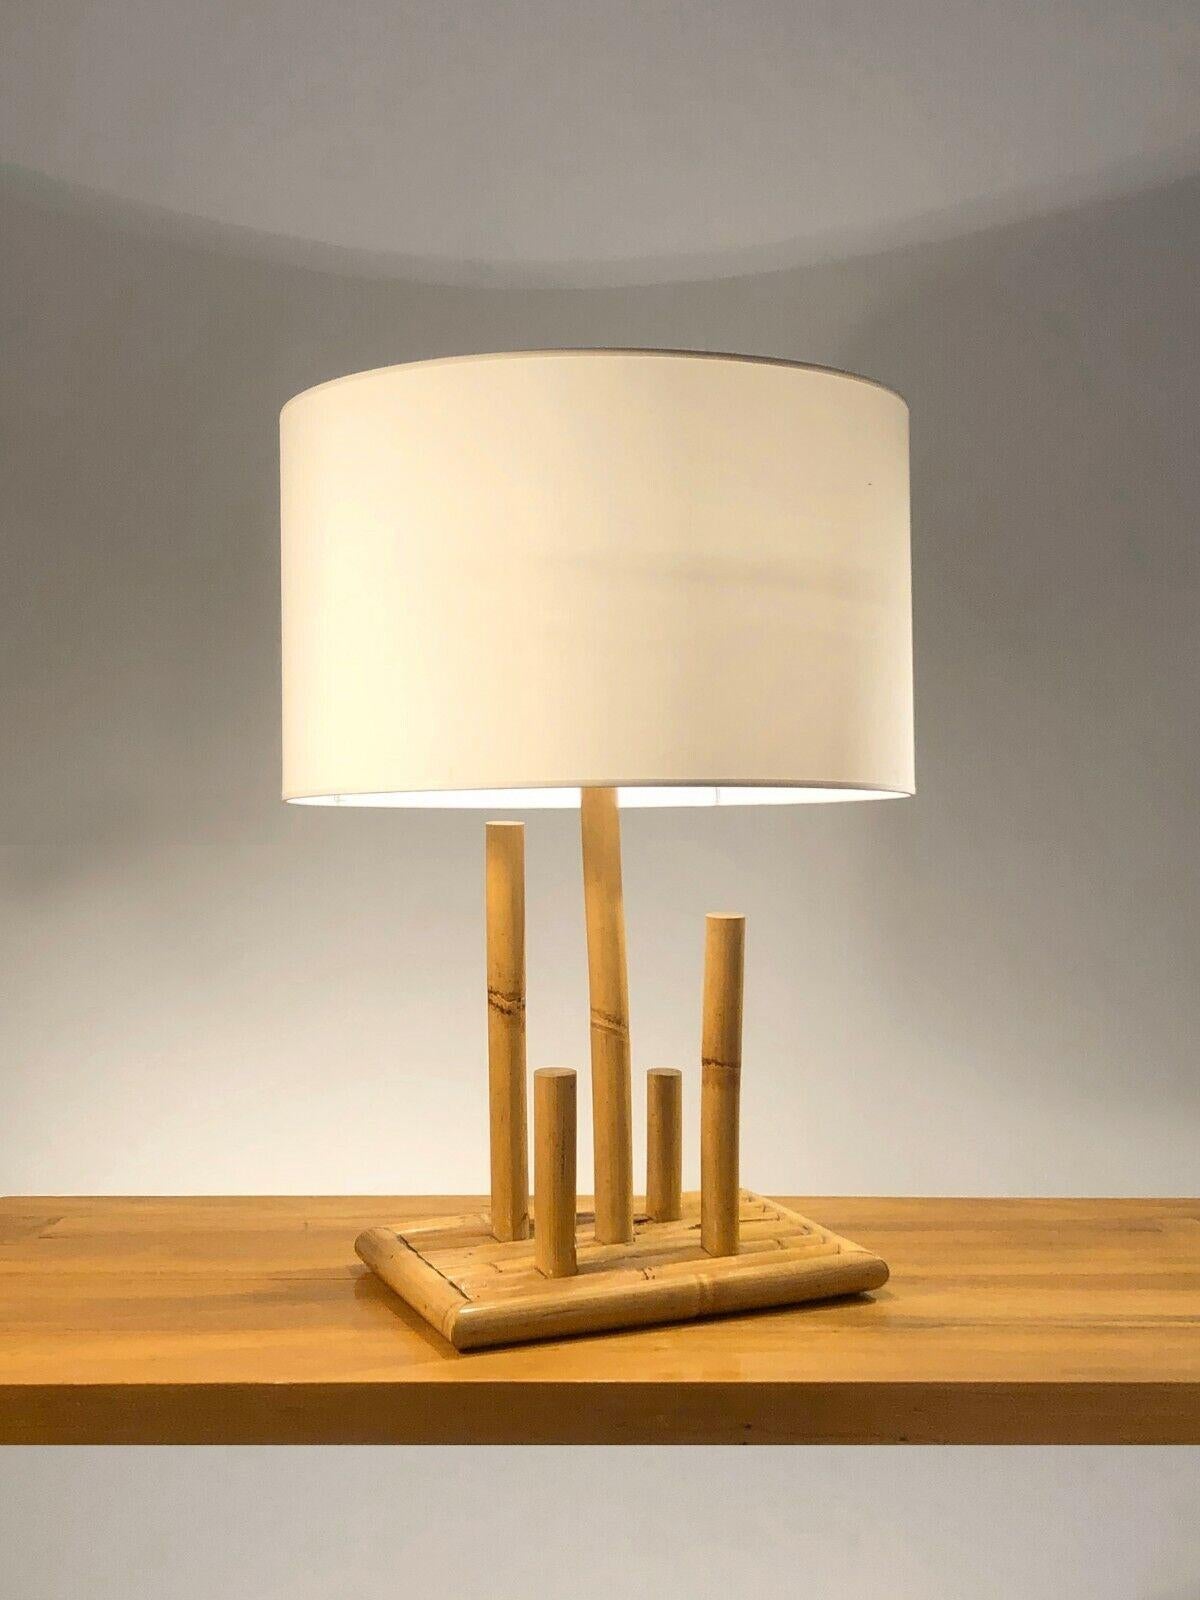 A MODERN BRUTALIST Bamboo TABLE LAMP, AUDOUX-MINNET Style, France 1970 For Sale 1